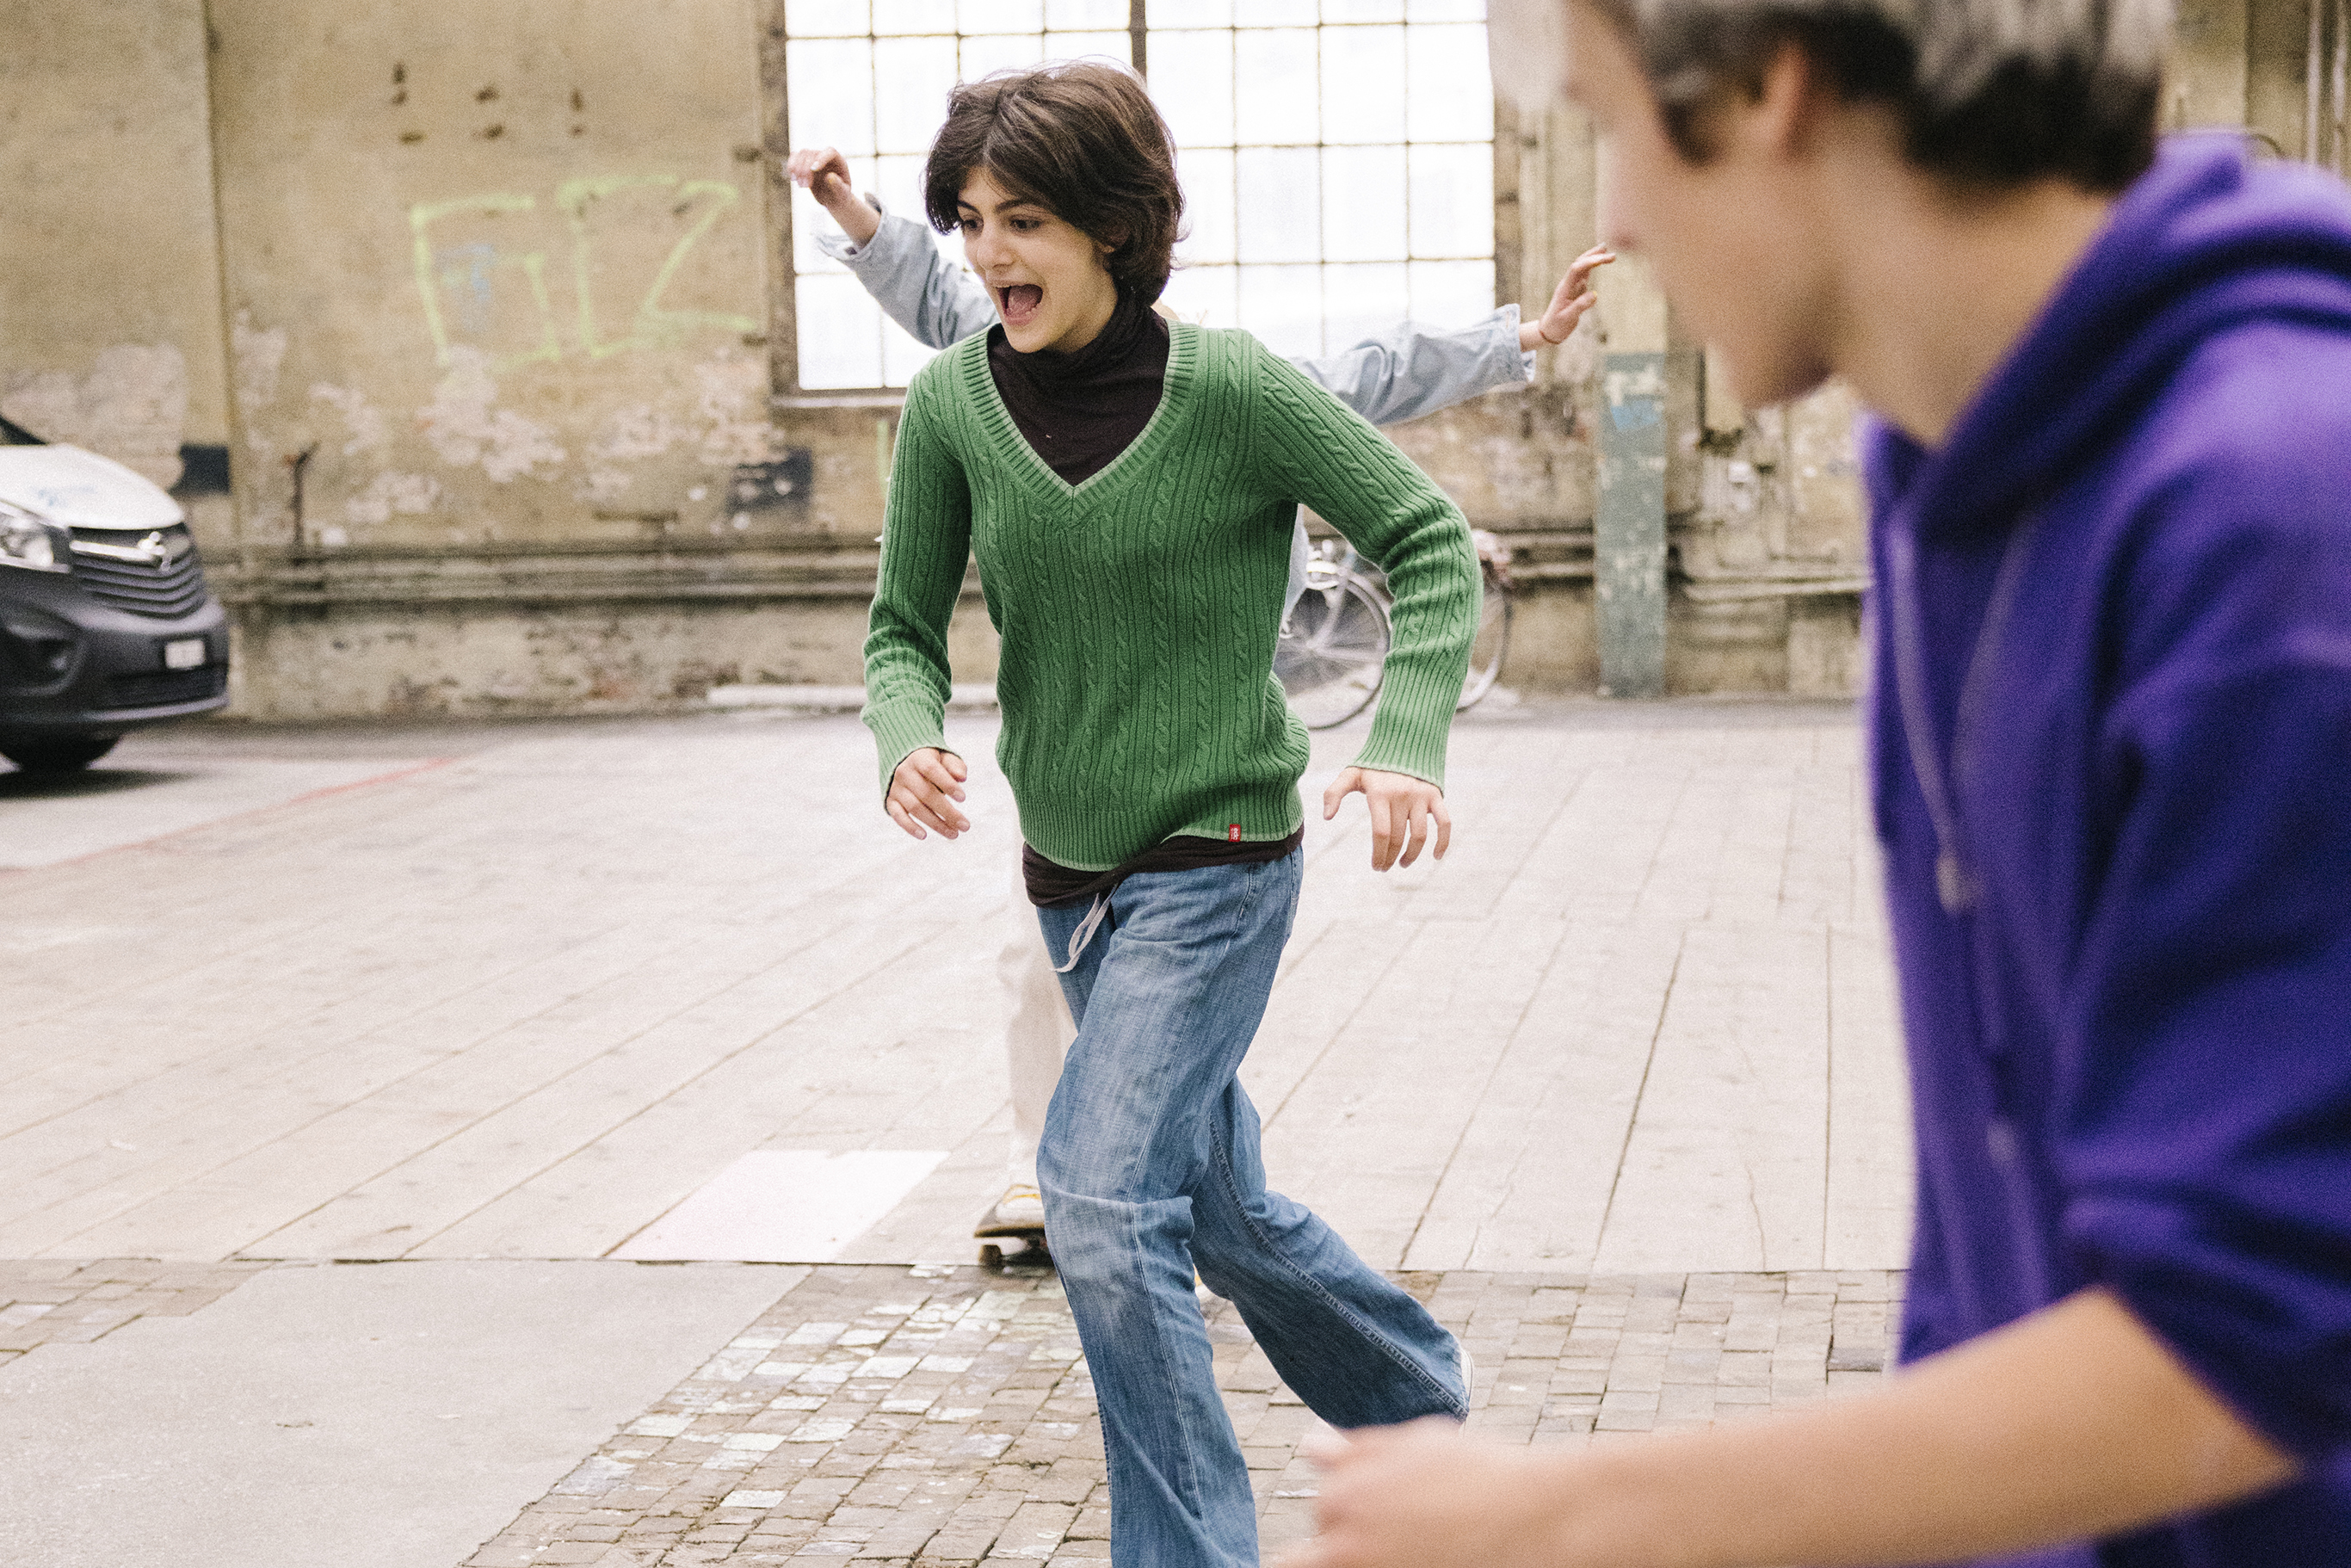 A teenager runs laughing towards her skateboard lying on the ground.